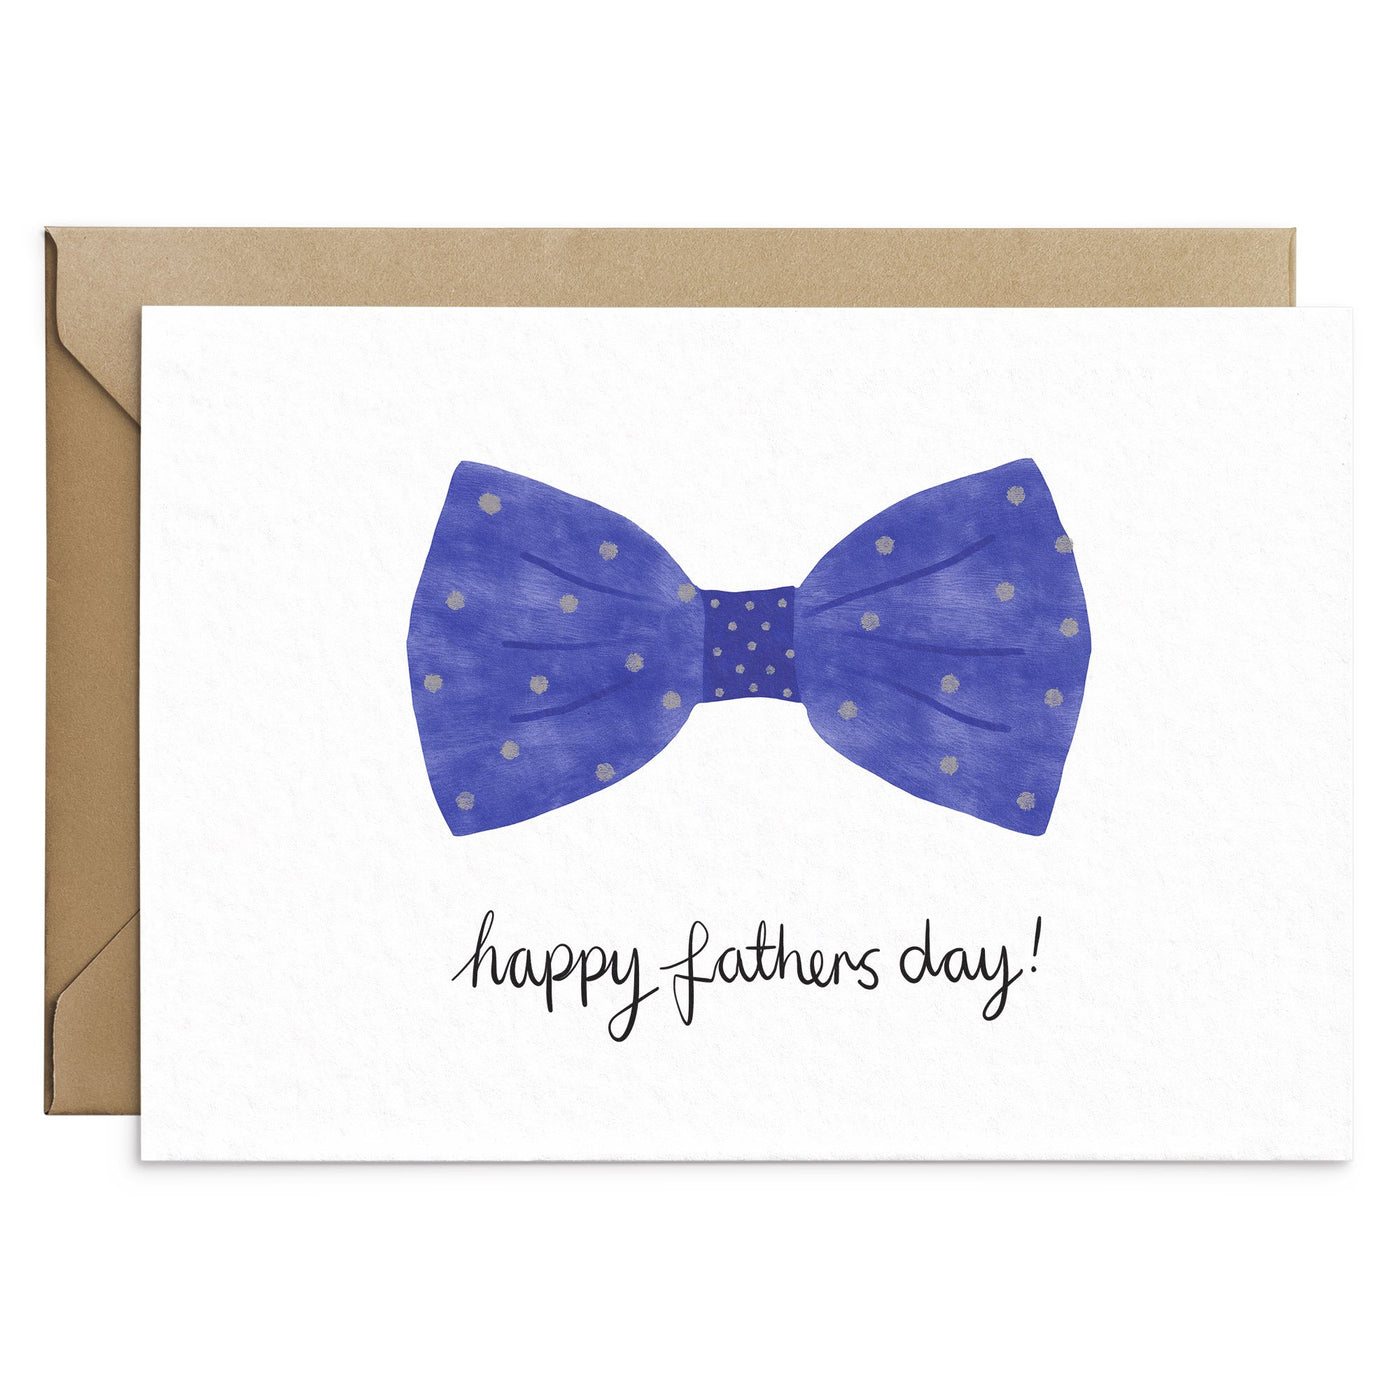 Fathers Day Bow Tie Card - Poppins & Co.